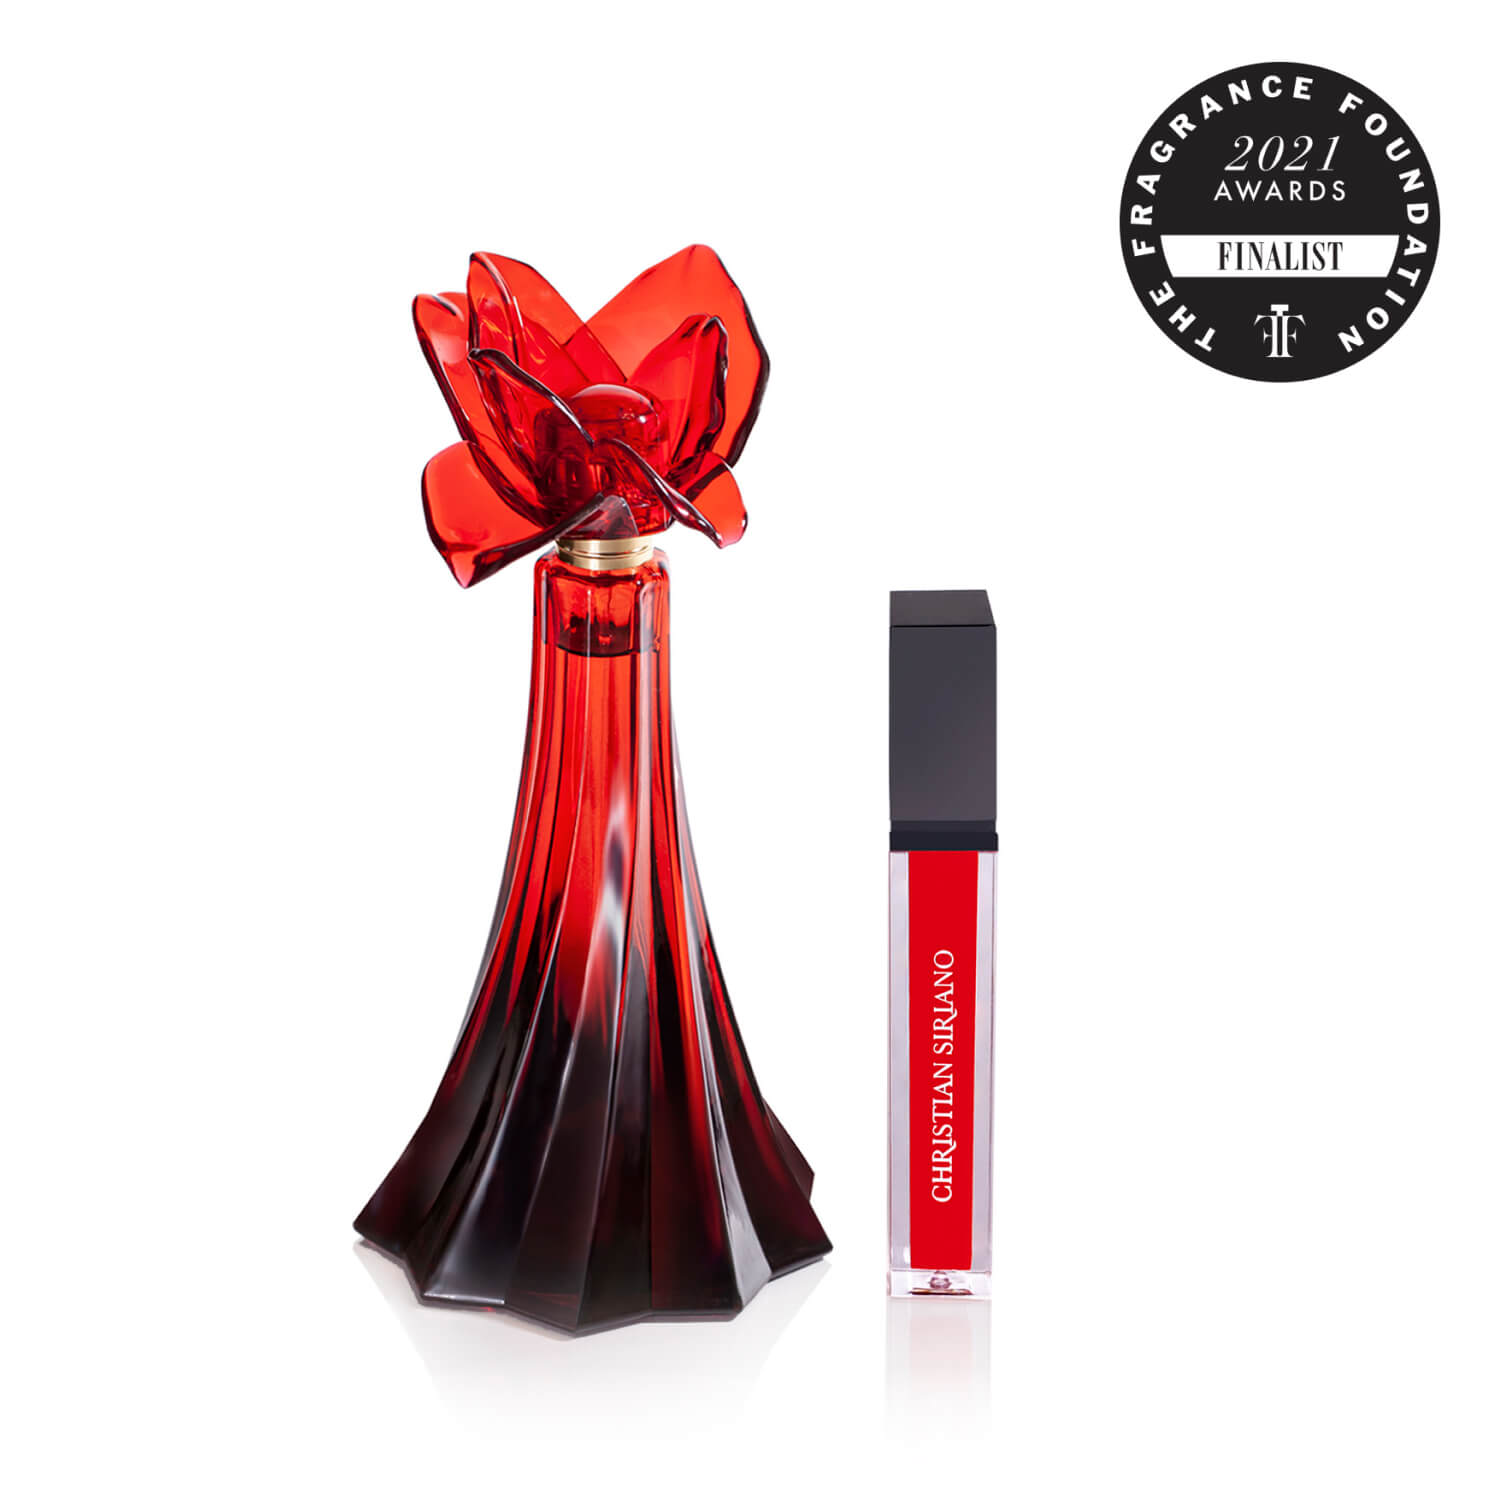 Get Christian Siriano Ooh La Rouge at Scentbird for $16.95